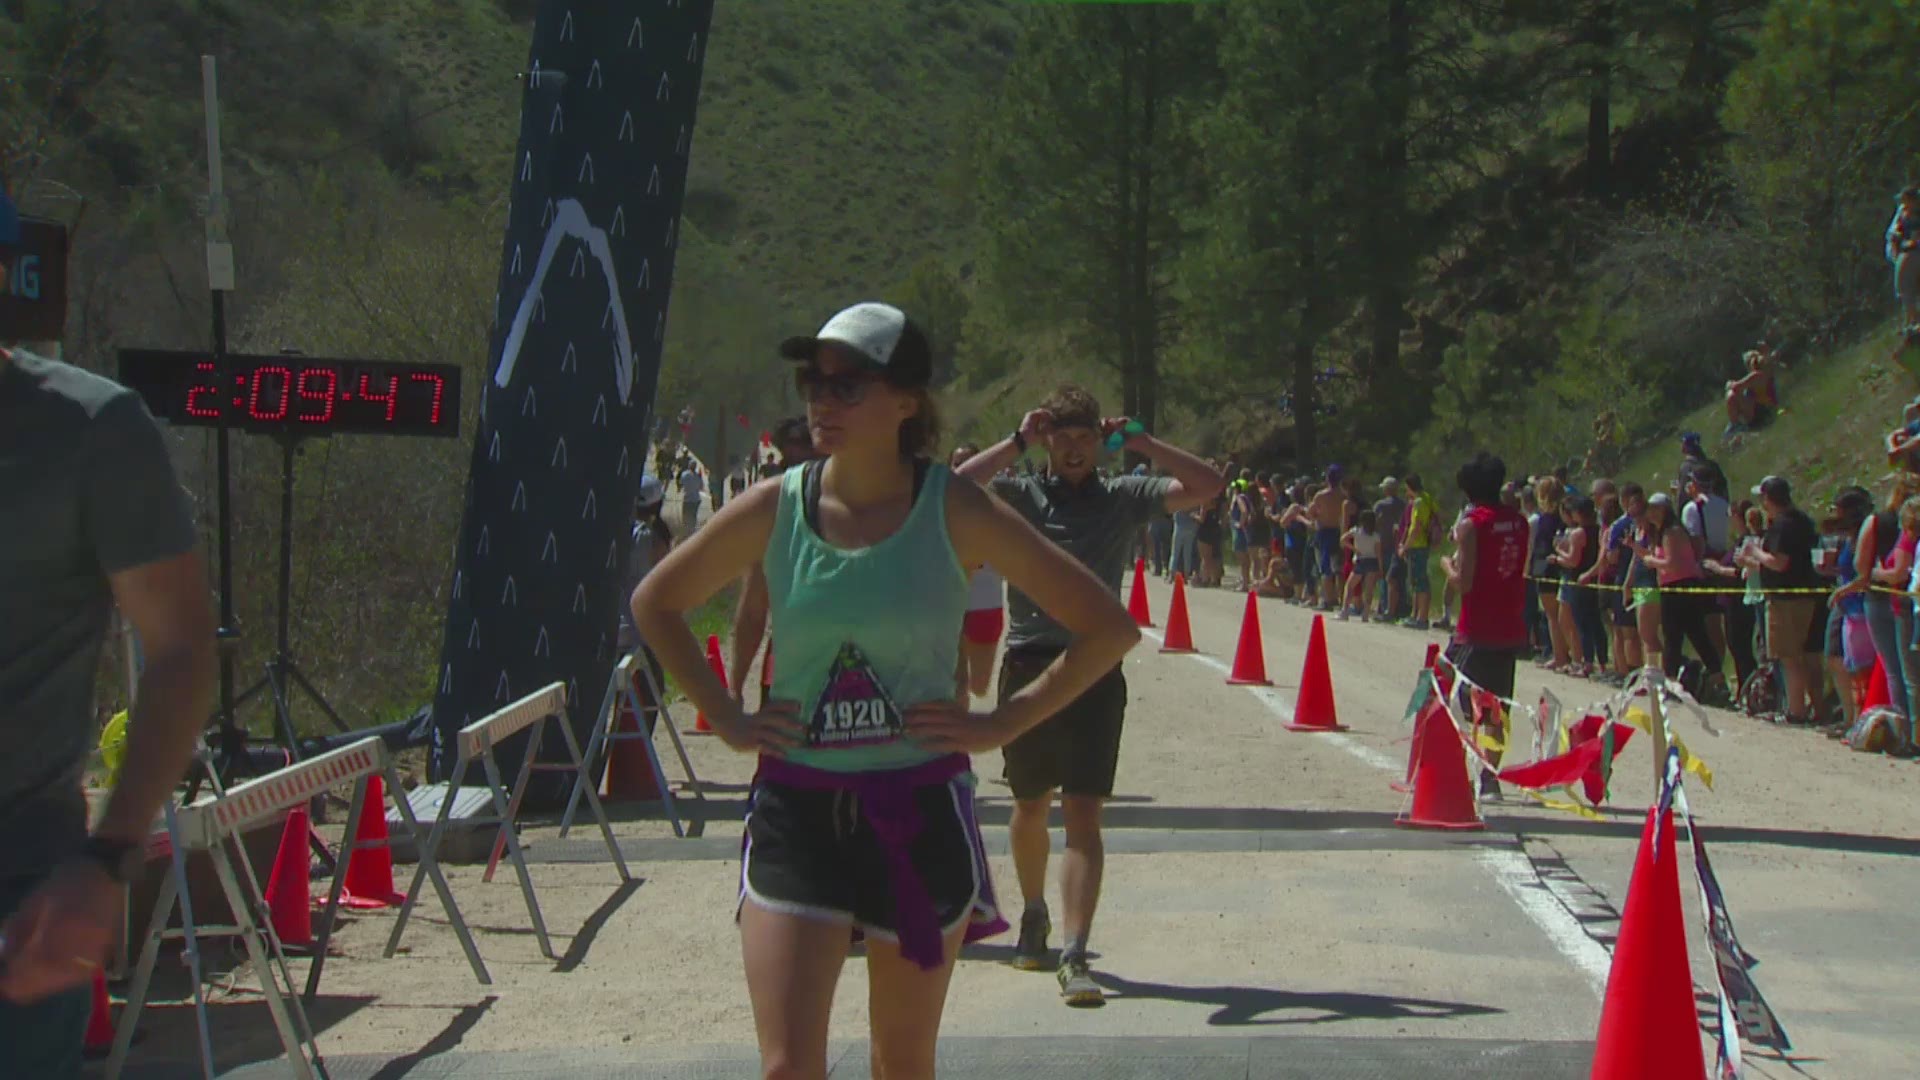 Sixth group of finishers in 41st annual Race To Robie Creek